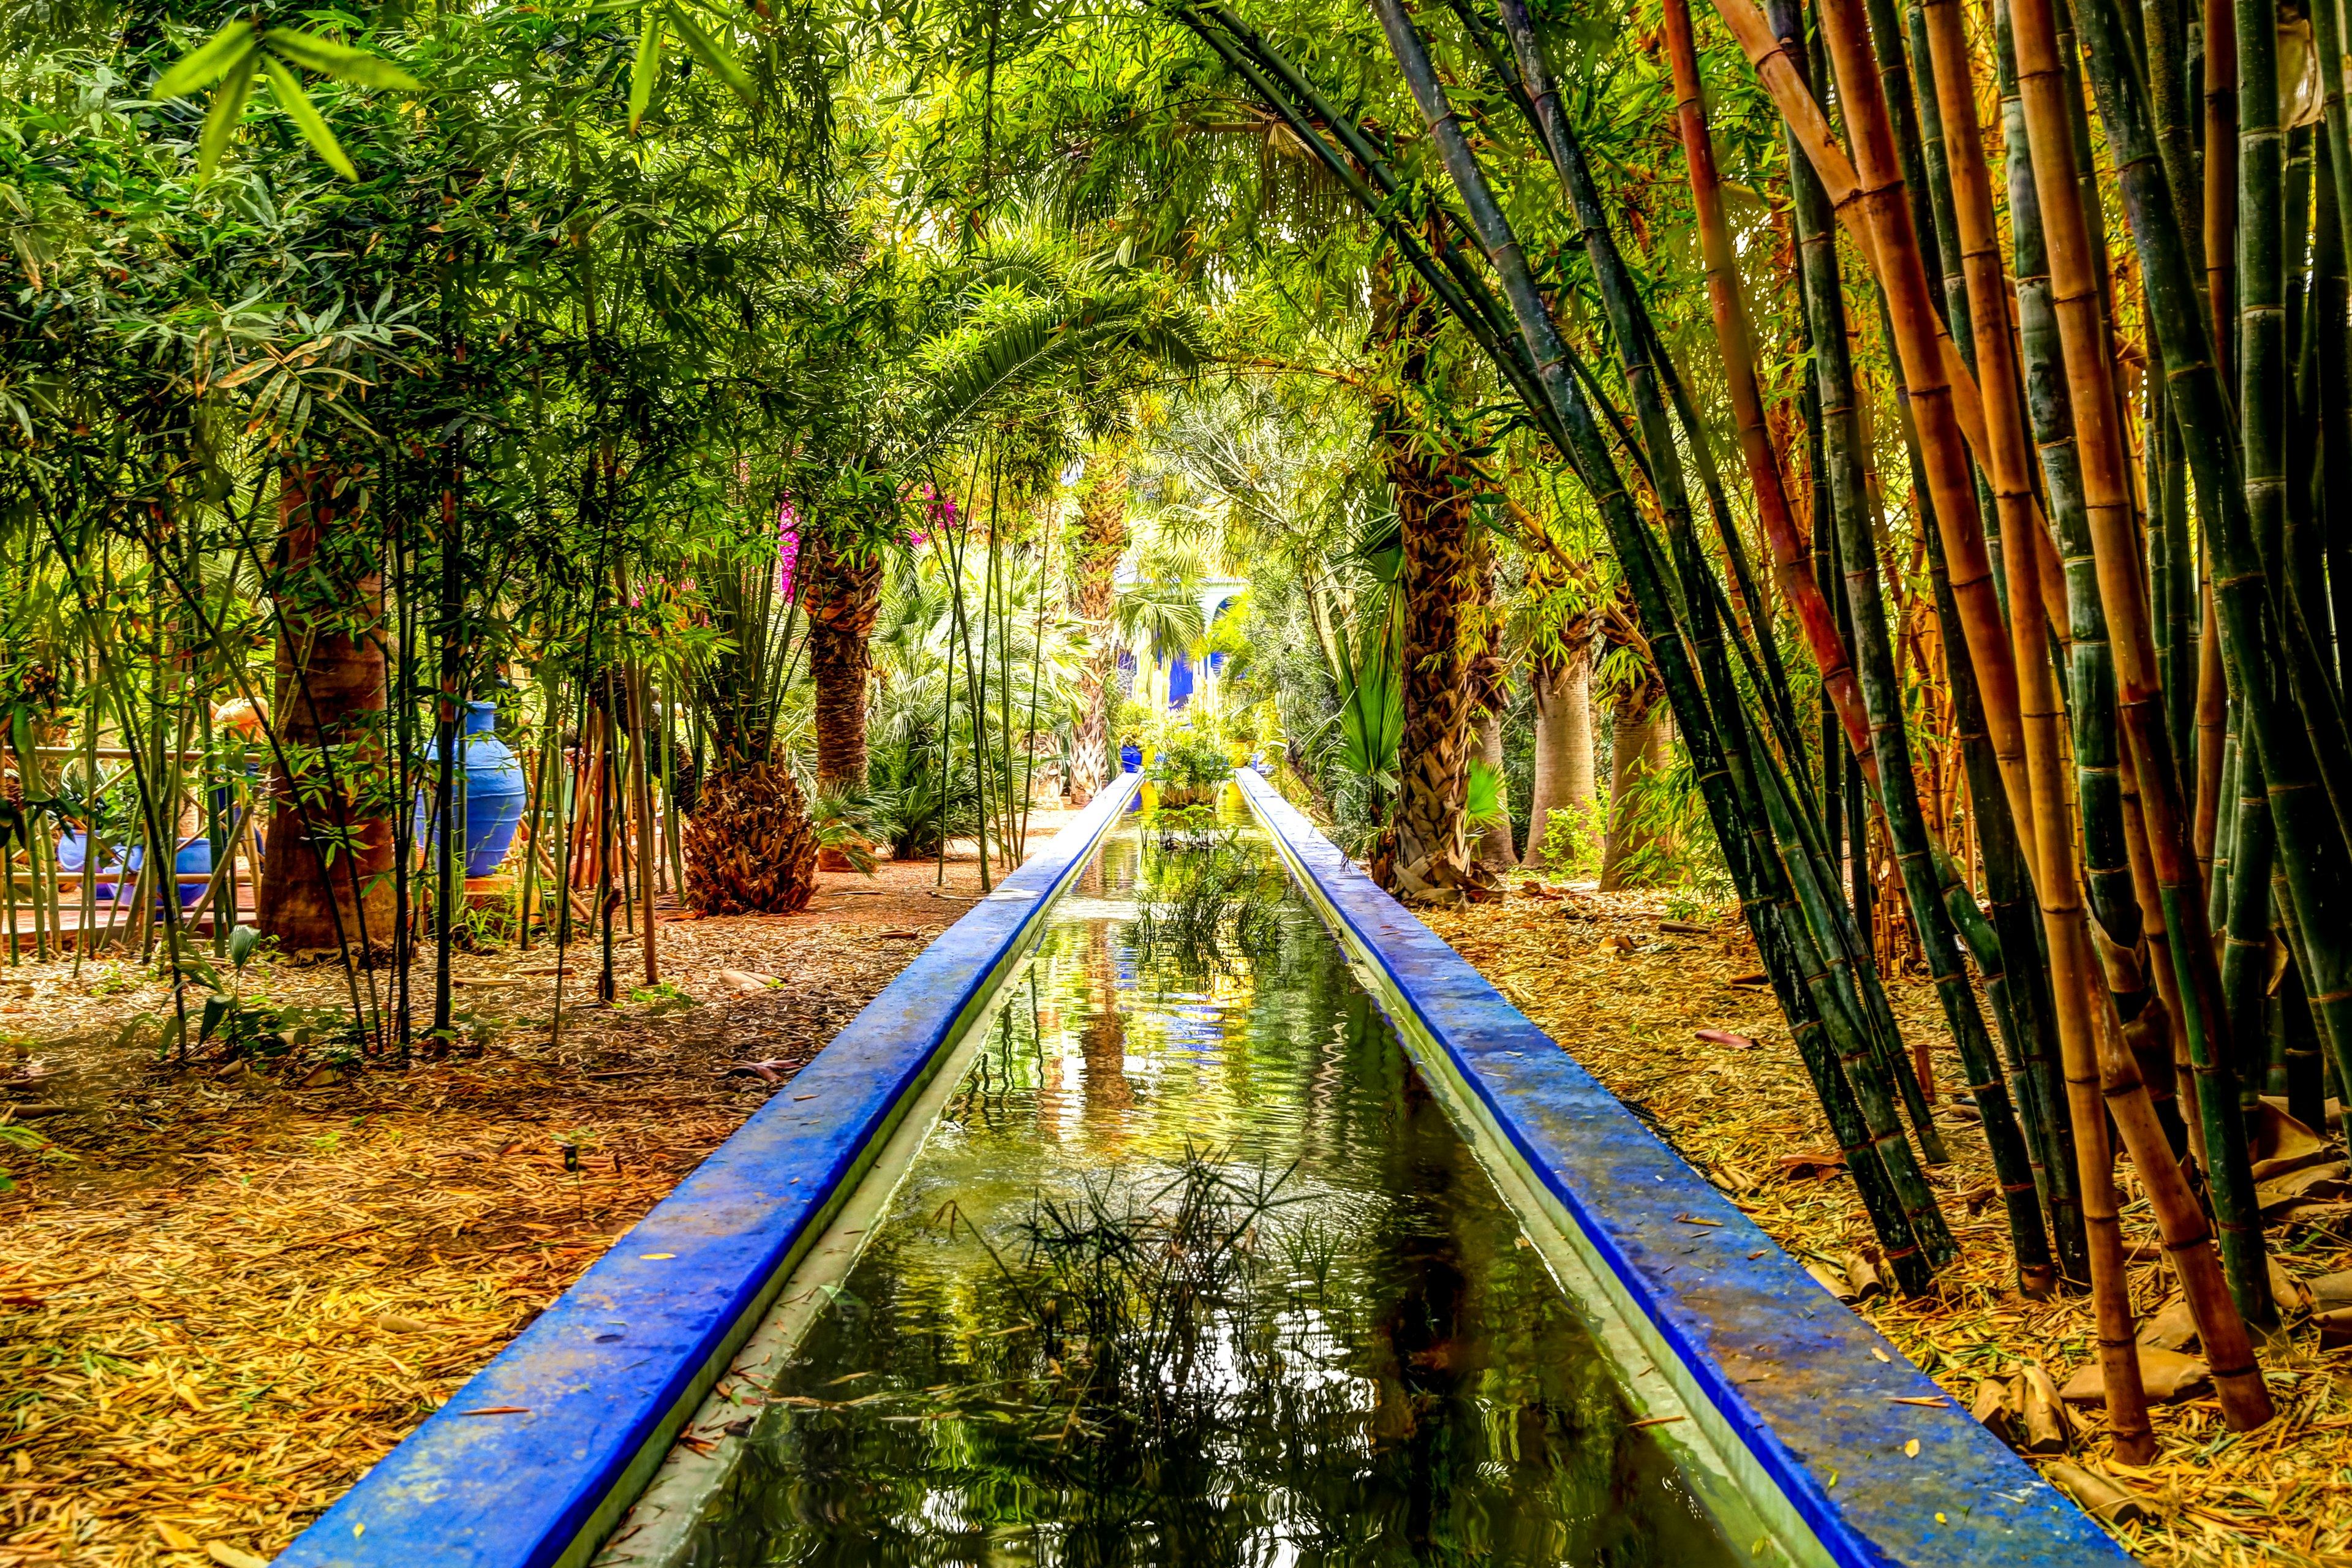 A colorful image of a pond with blue edges and a small forest like surroundings in Marrakech.